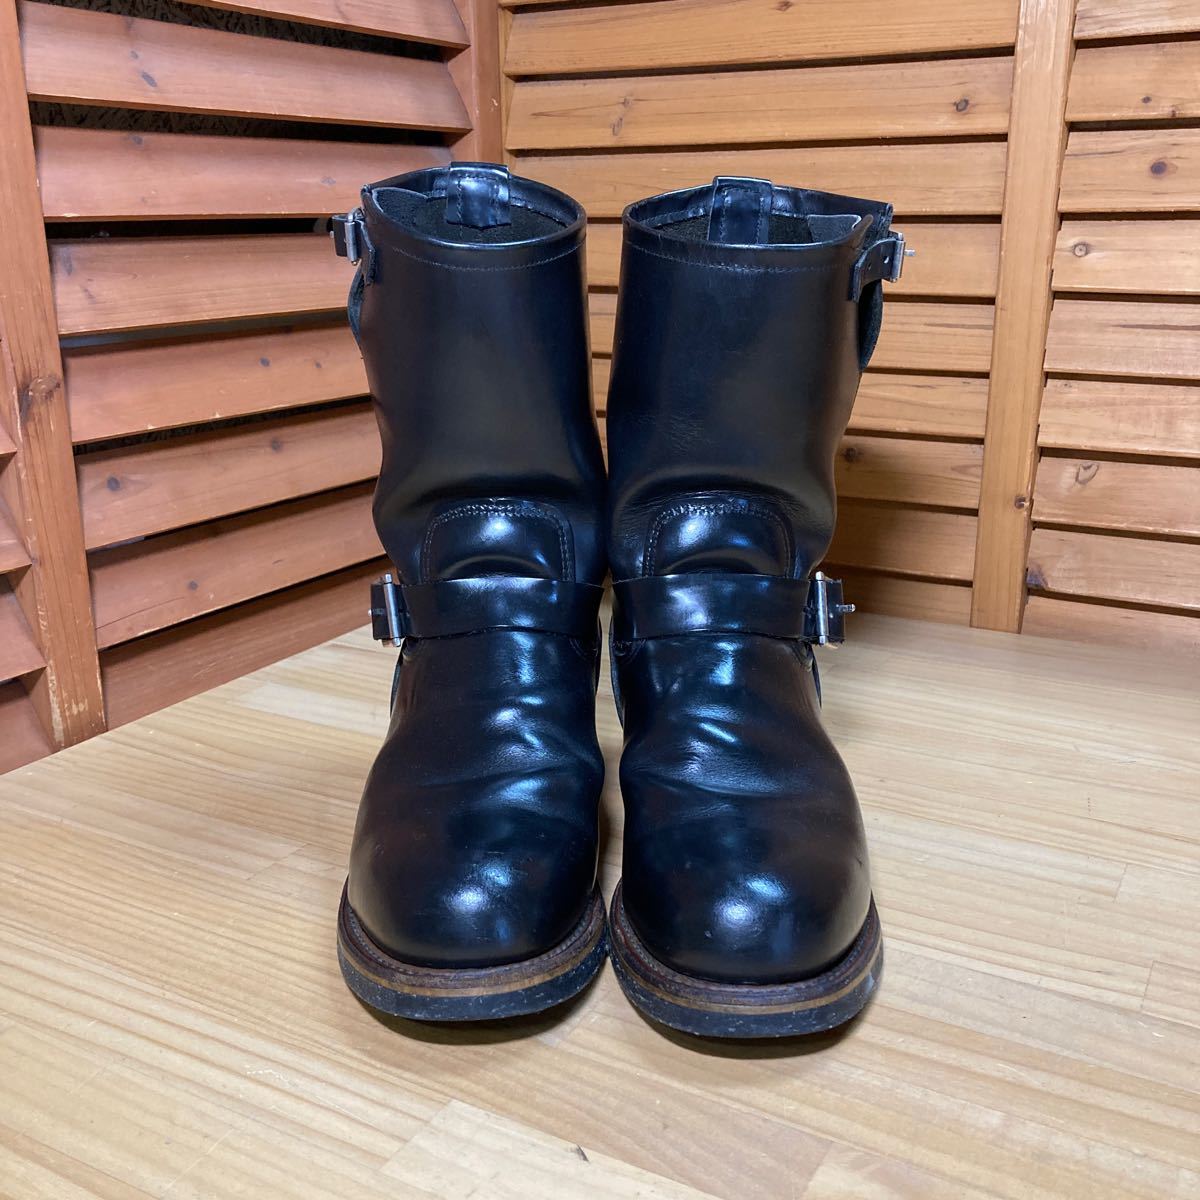 Y free shipping ^951[RED WING Red Wing ]PT99 embroidery 2268 engineer steel tu boots black SIZE 10D